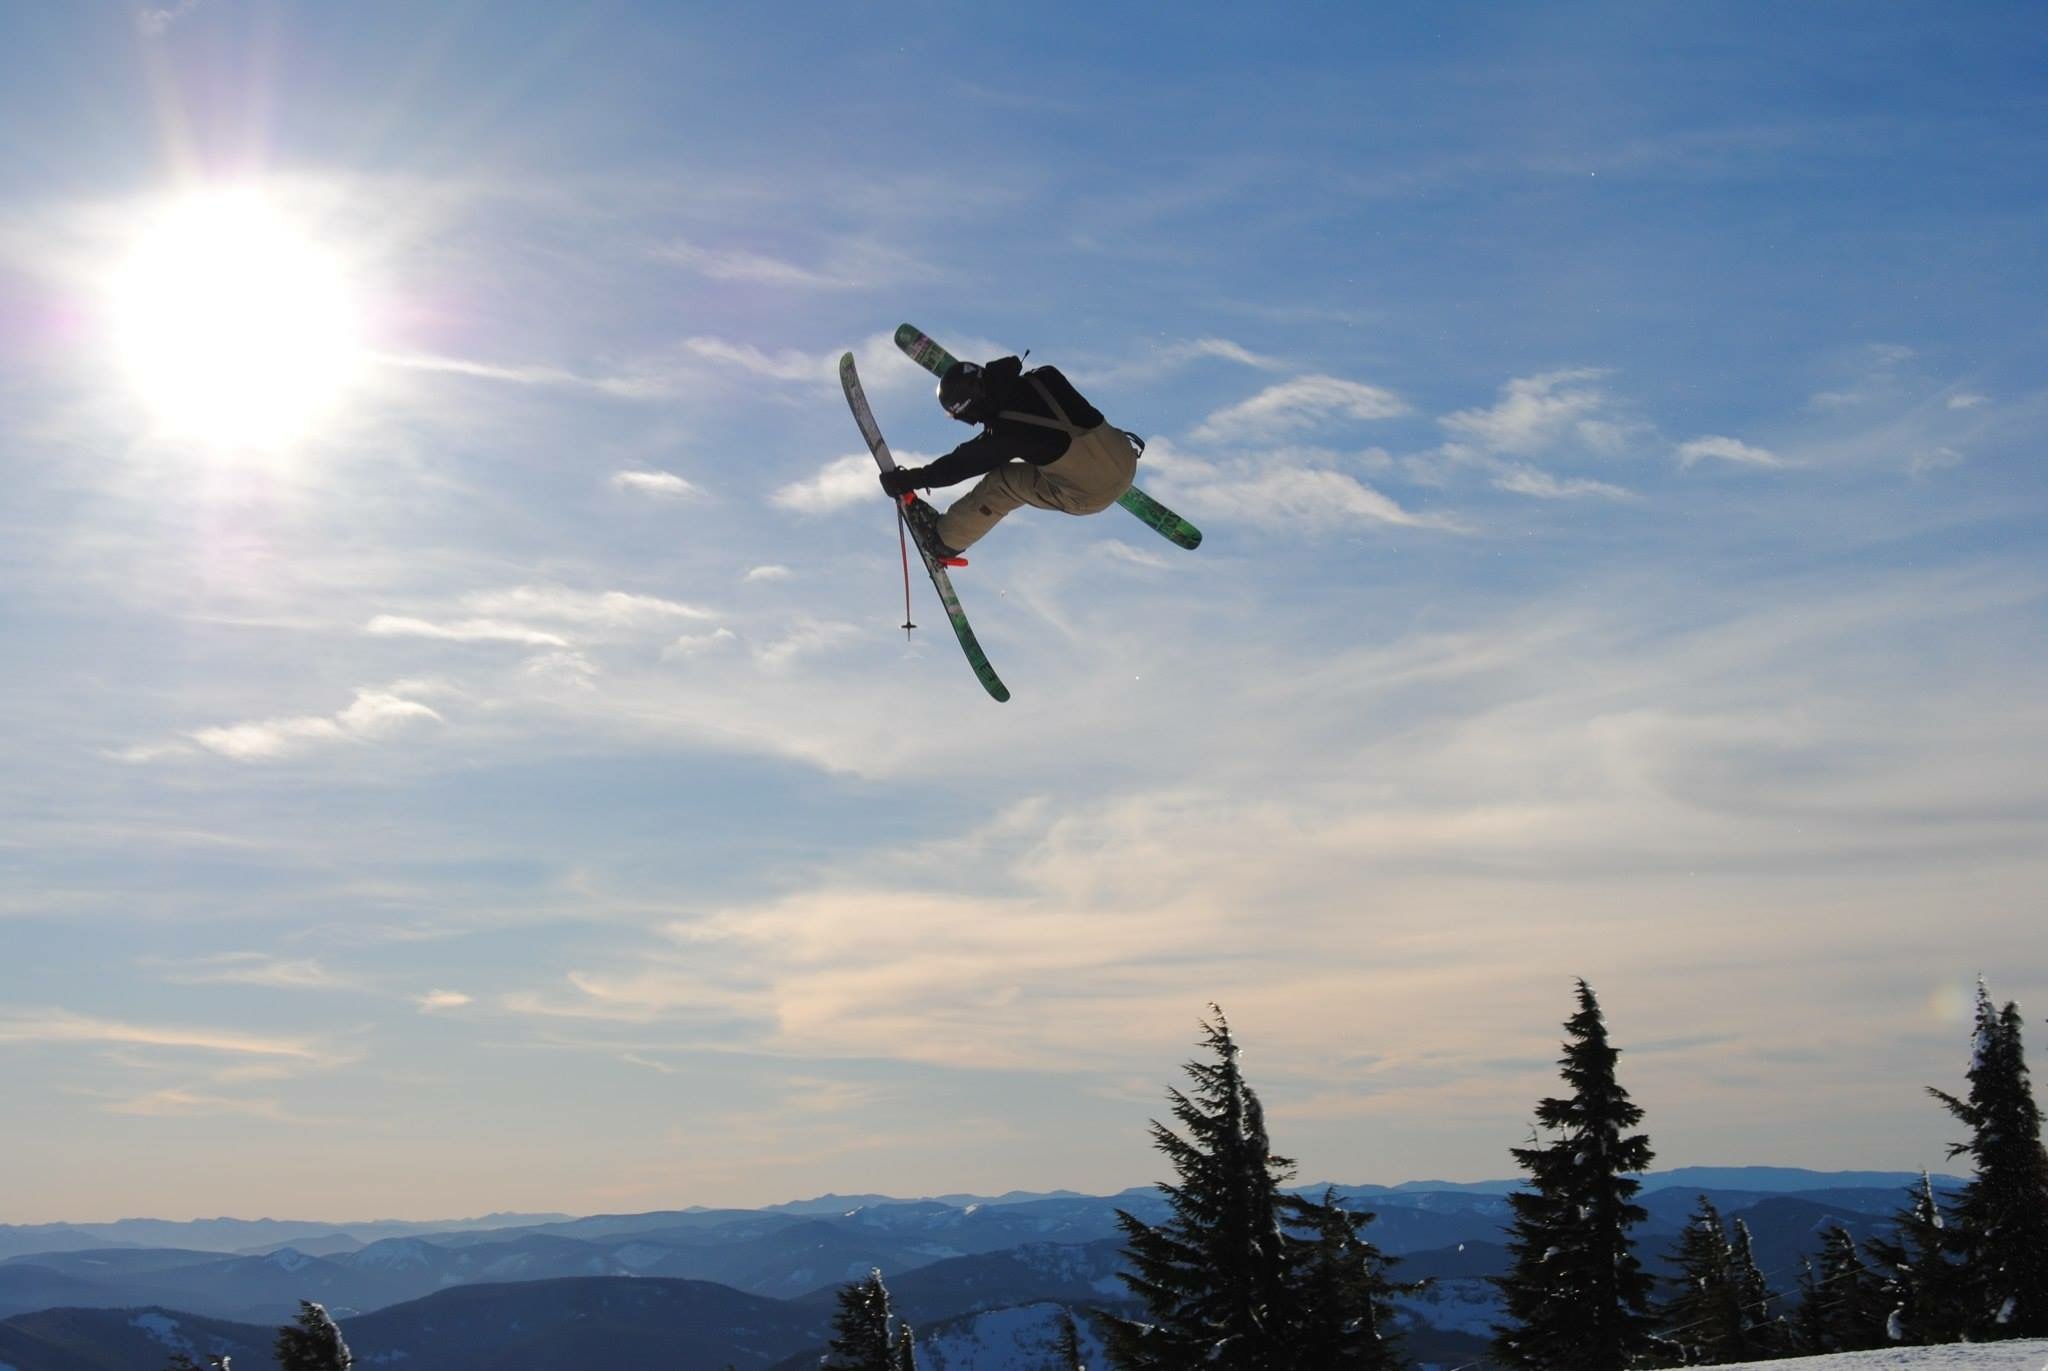 Our son competing in Freeski competitions at Nationals